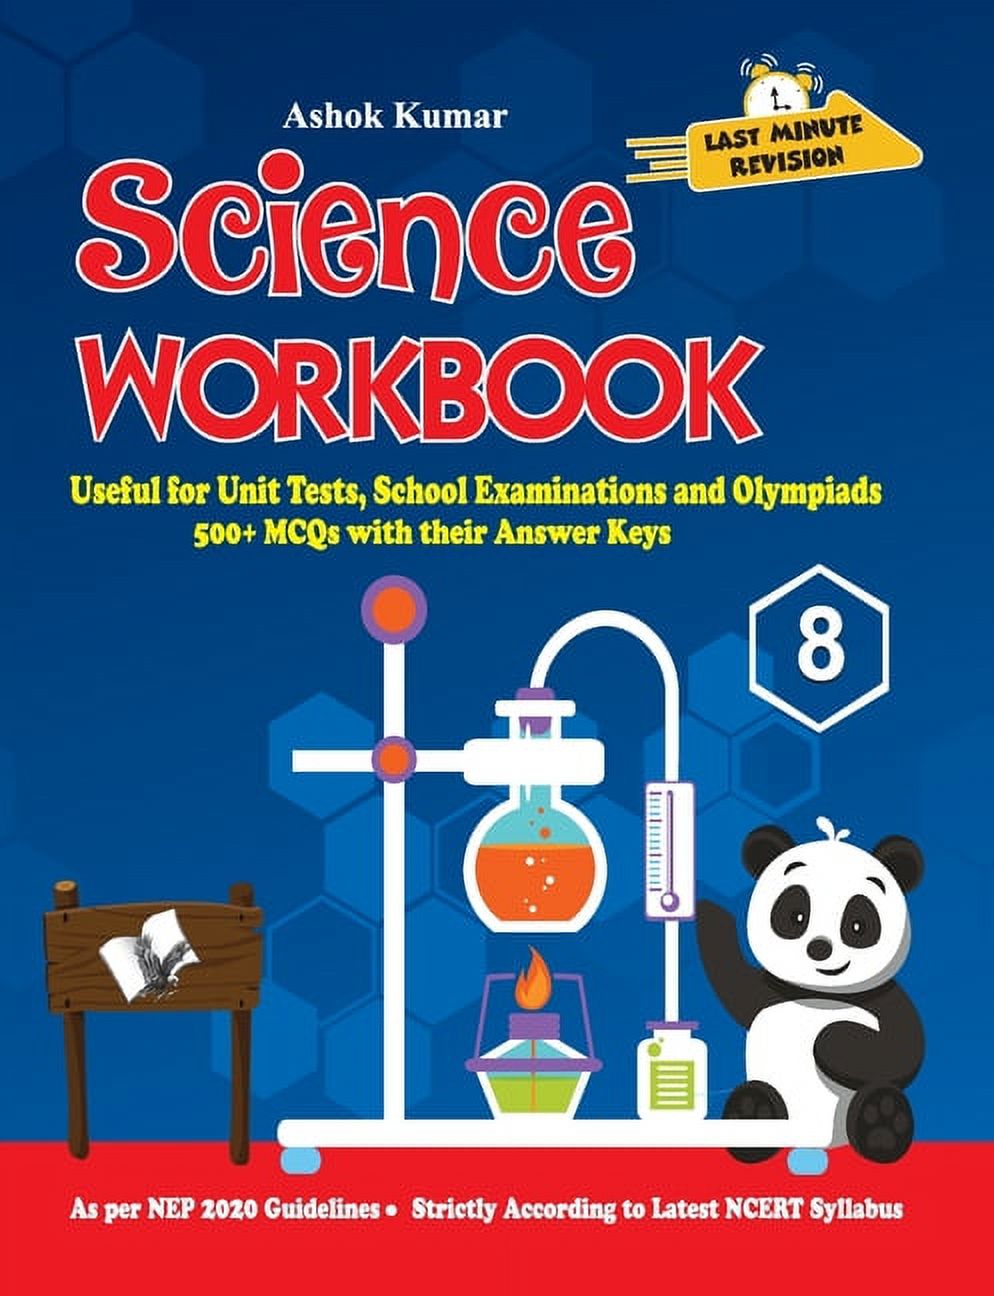 Science Workbook Class 8: Useful for Unit Tests, School Examinations & Olympiads (Paperback) - image 1 of 1